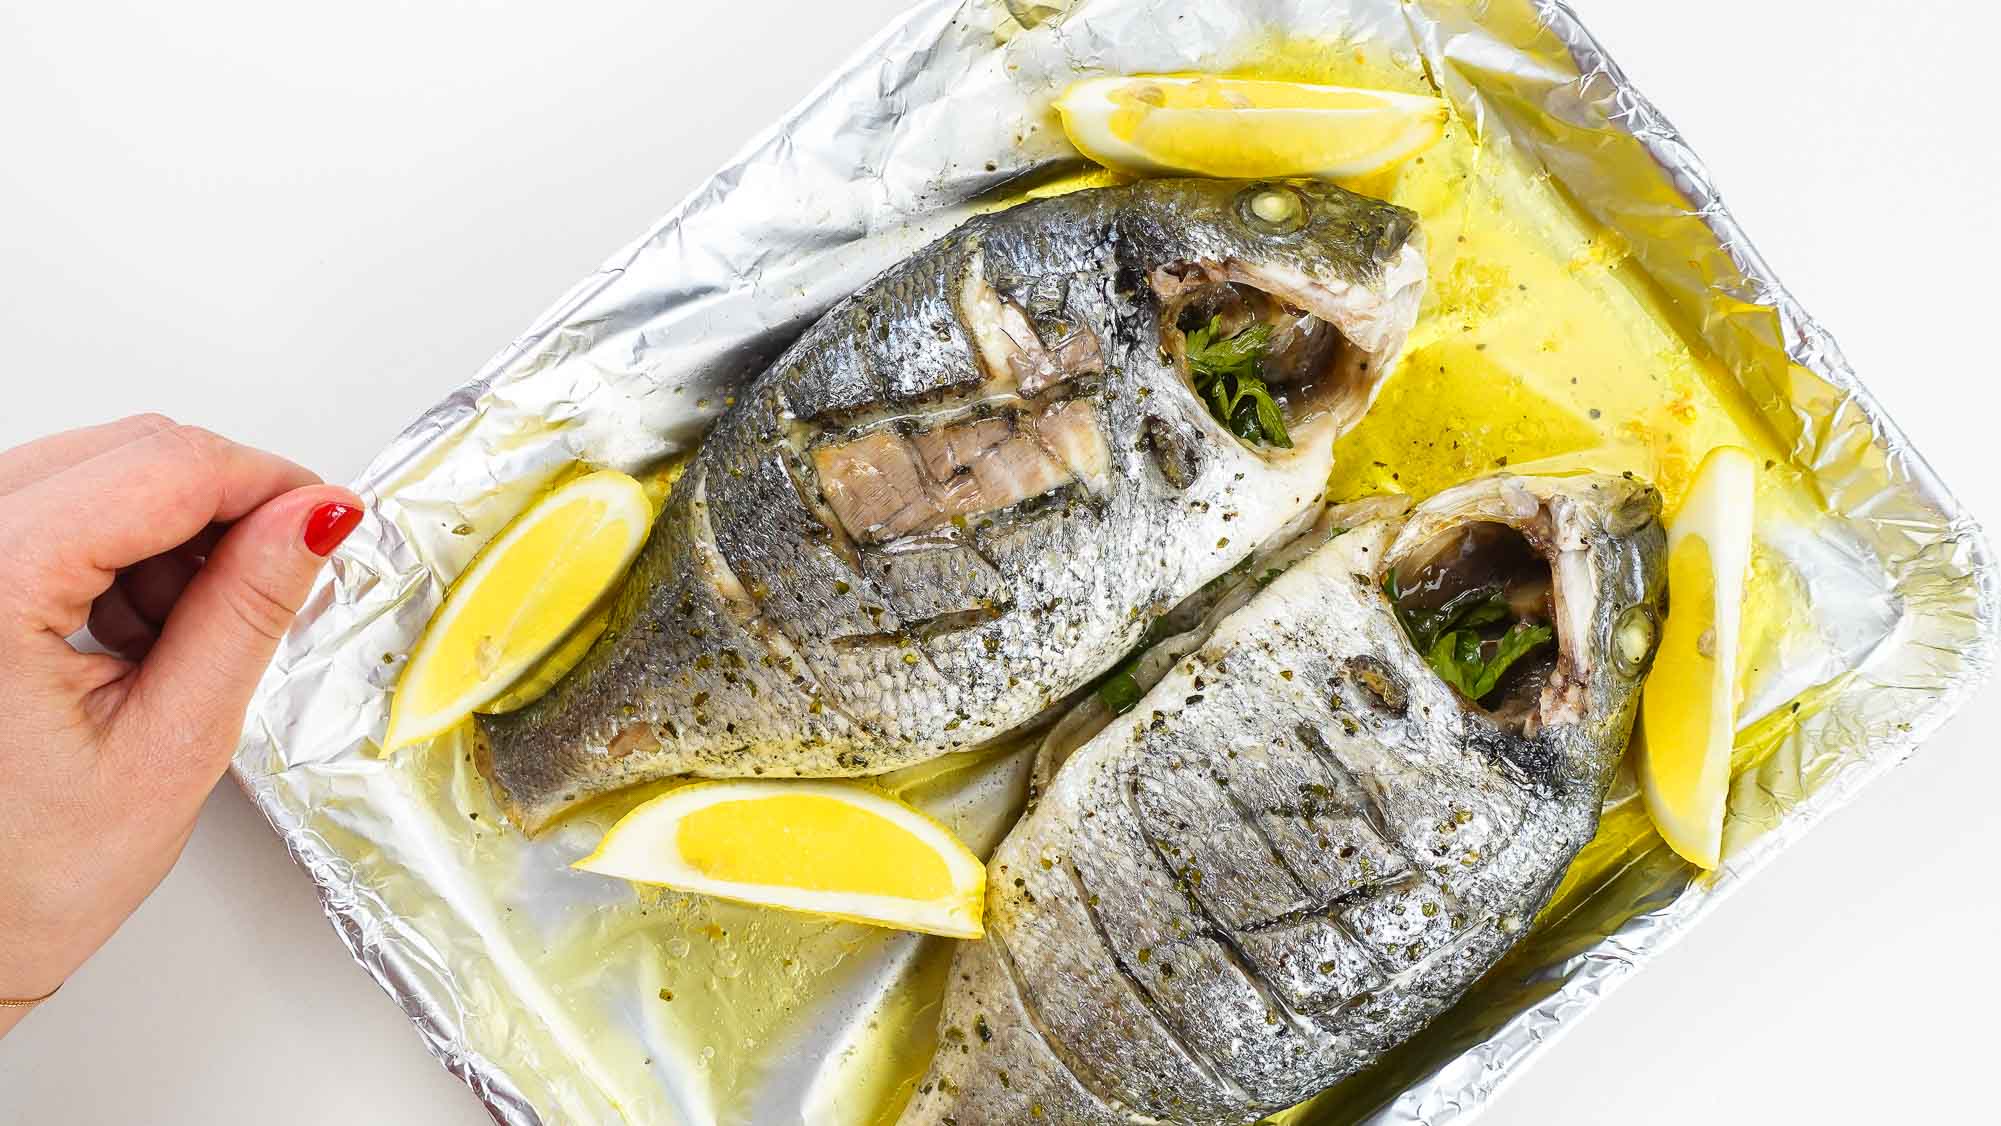 Delicious Foil baked Sea Bream with fresh lemon slices on a tray.